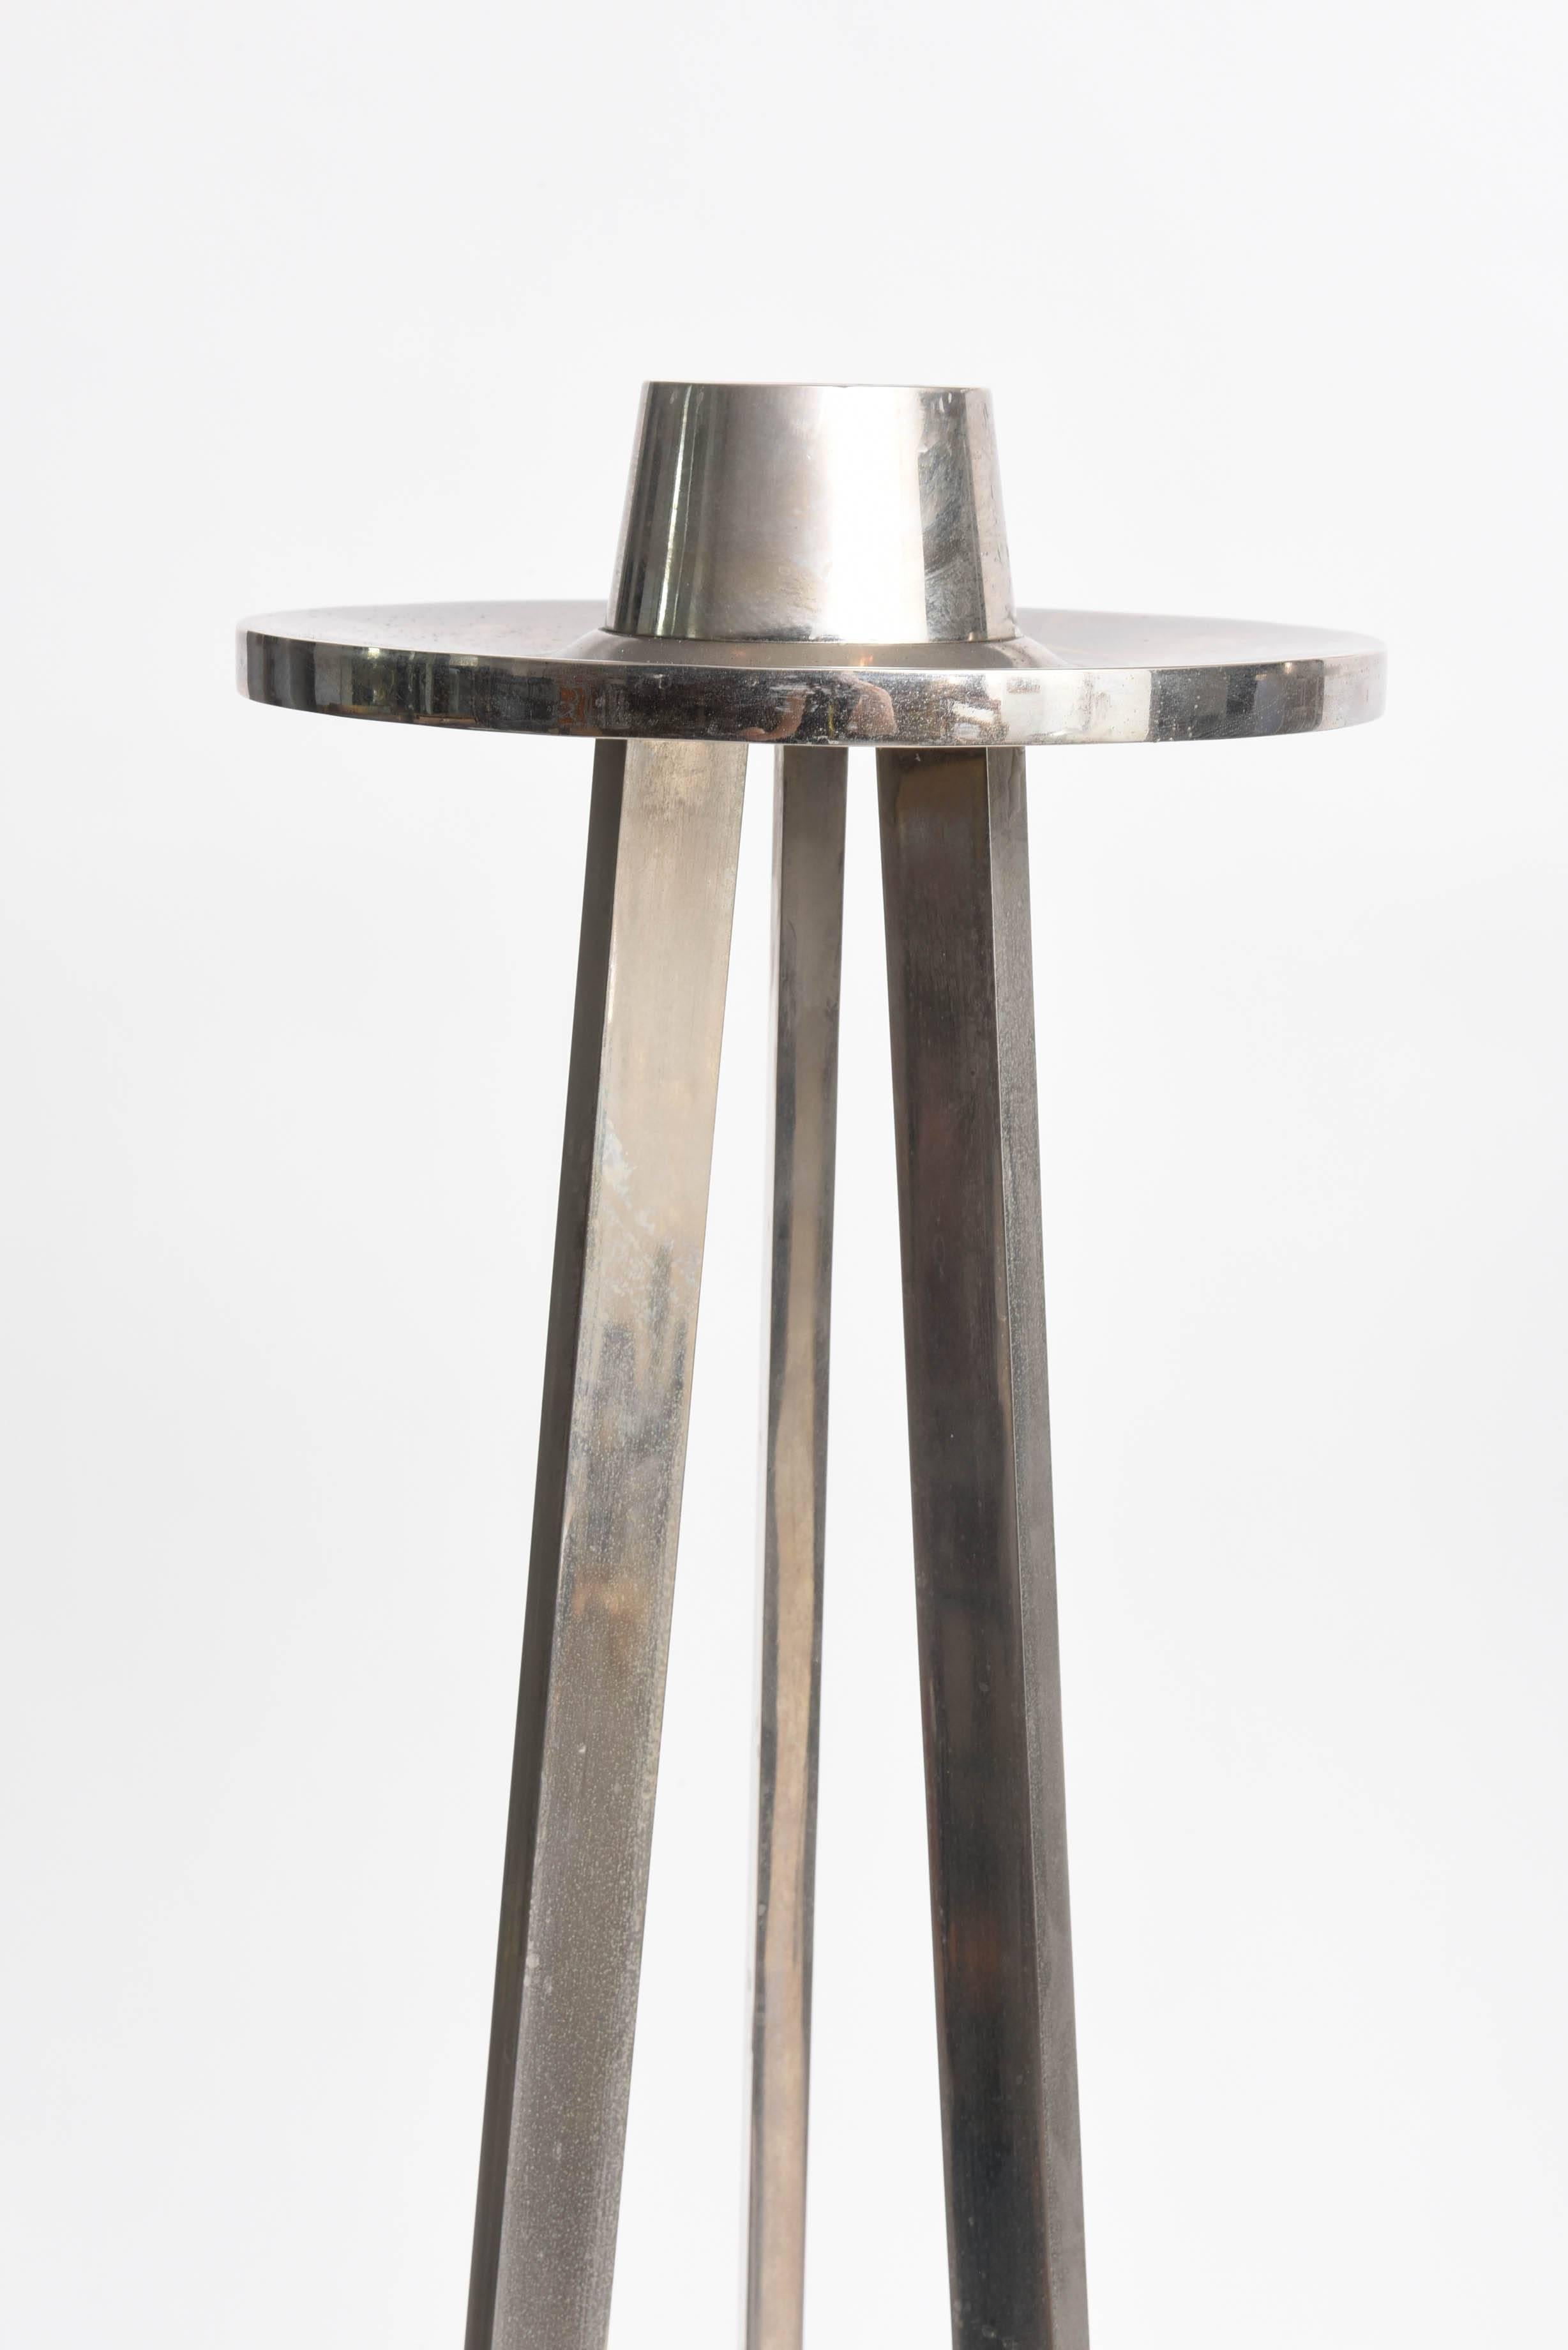 American Pair of Large 1970s Chrome Tripod Candle Torcheres For Sale